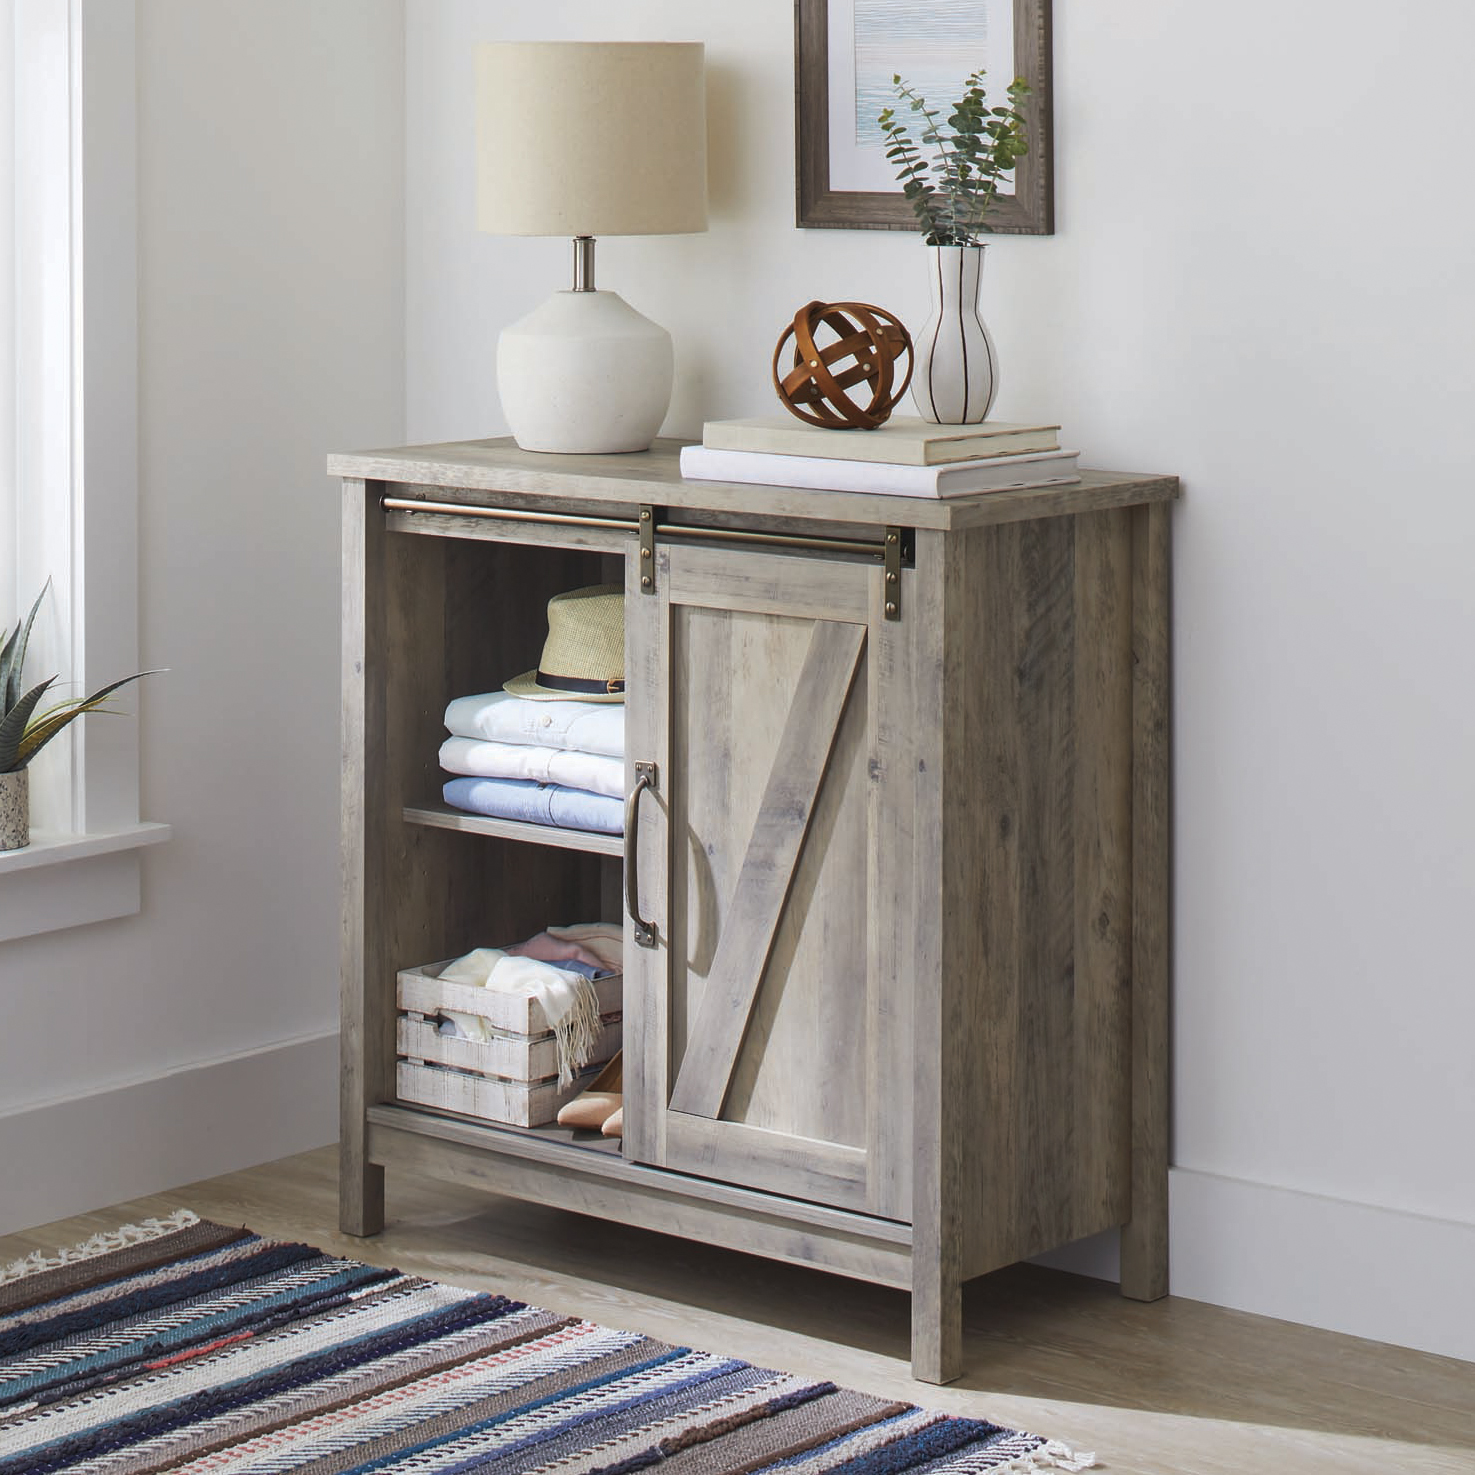 Better Homes & Gardens Modern Farmhouse Accent Storage Cabinet, Rustic Gray Finish - image 1 of 13